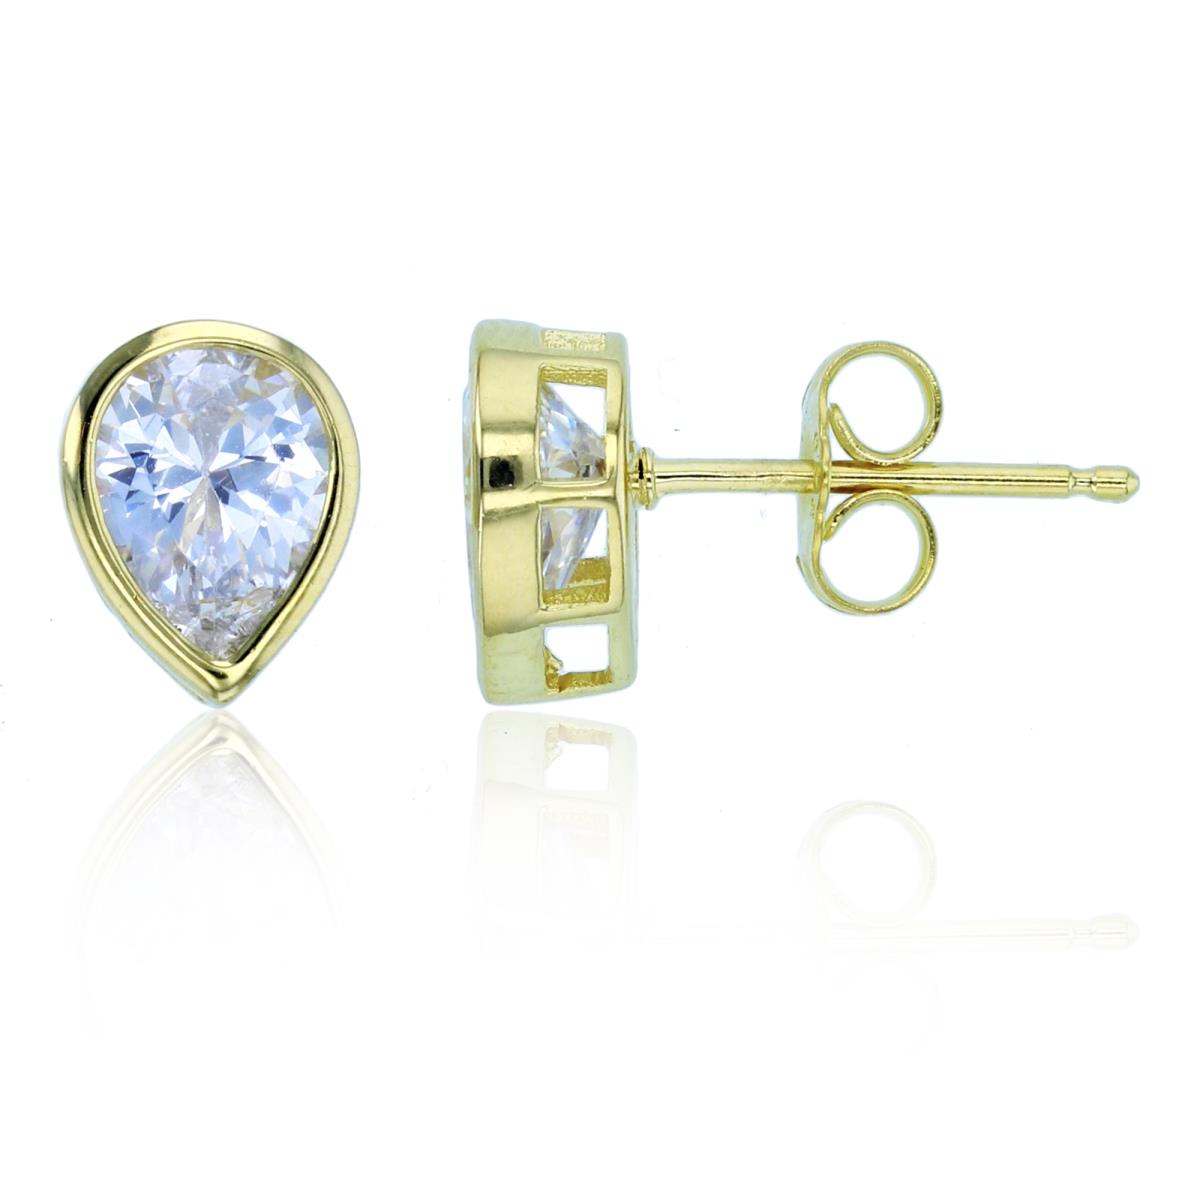 Sterling Silver+1Micron Yellow Gold 8x6mm Pear-shaped CZ Bezel Studs